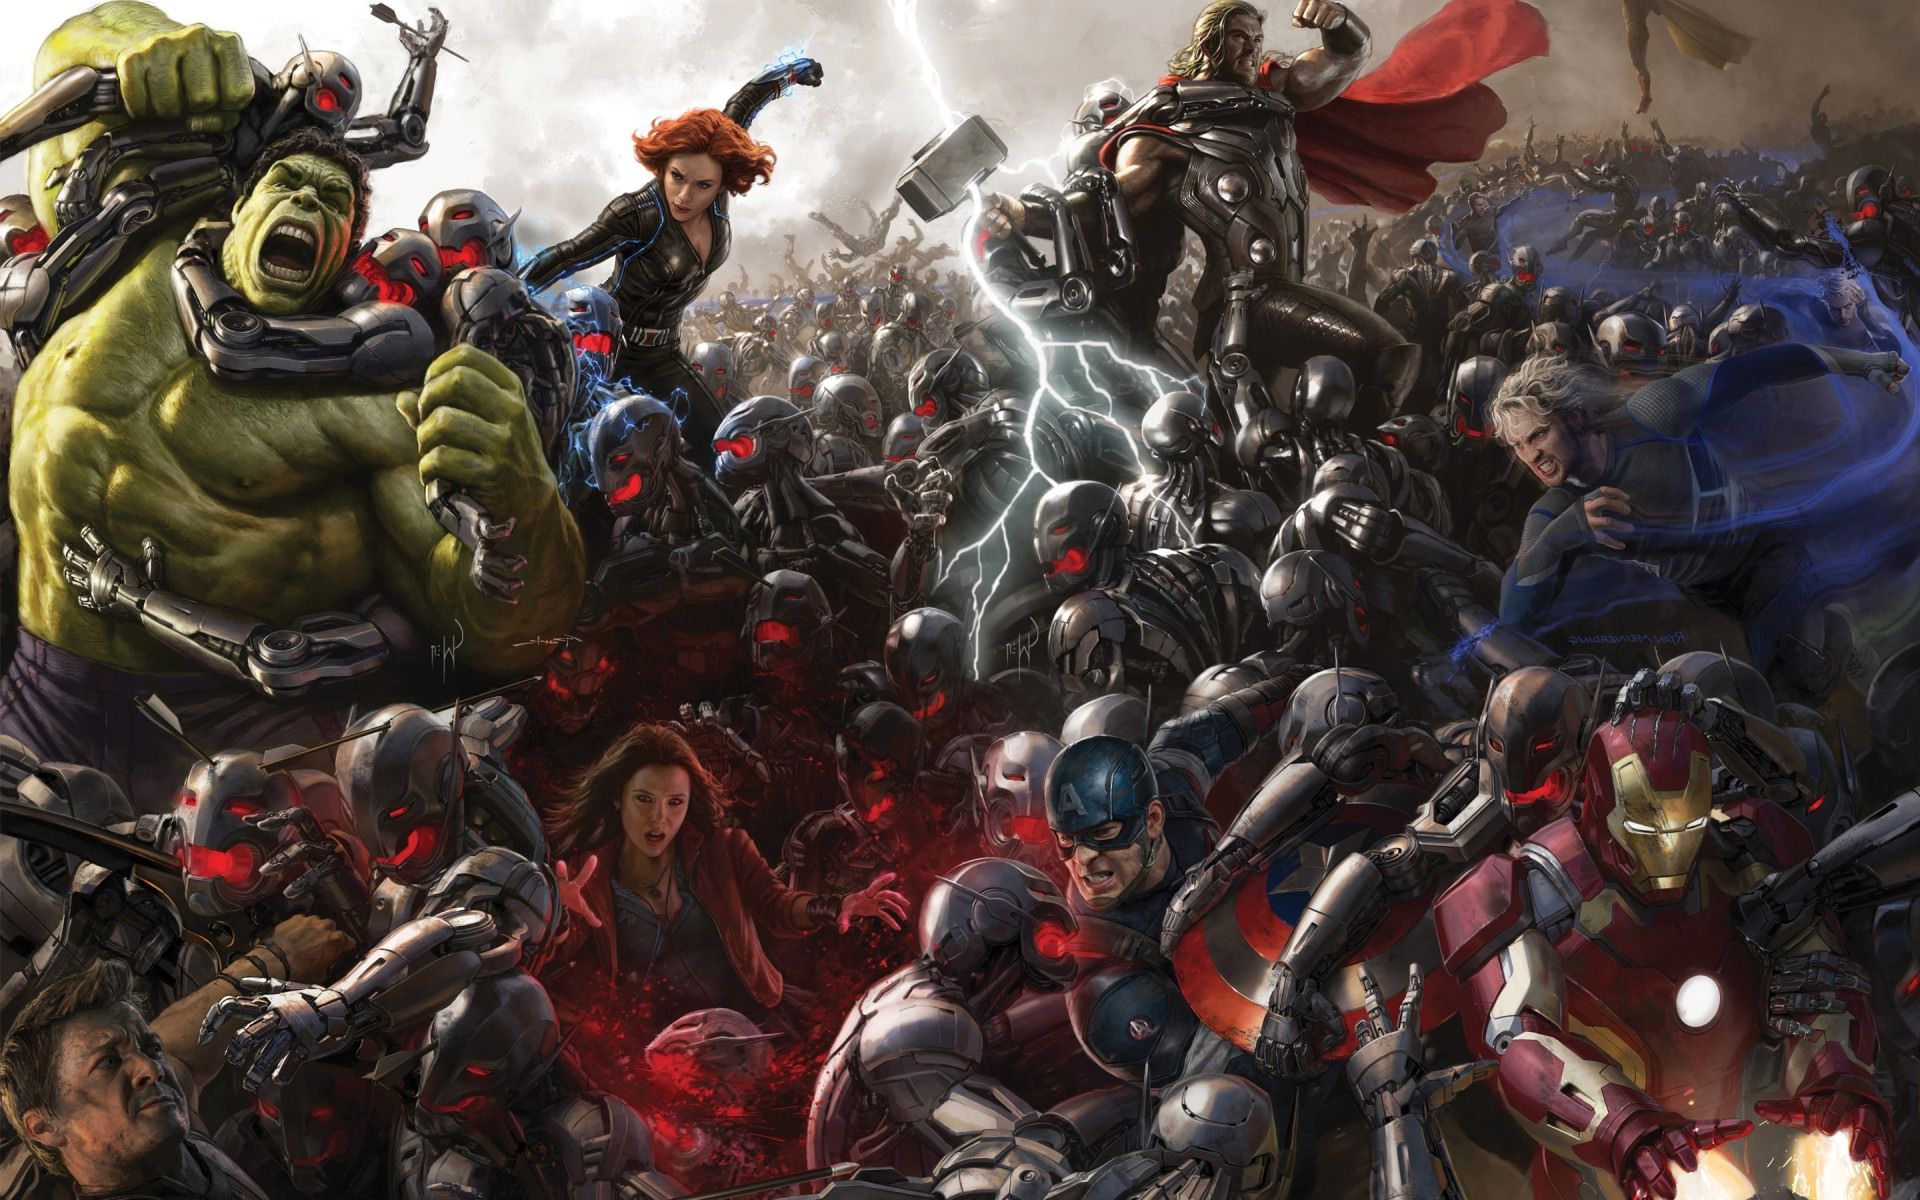 Movie Review: Avengers: Age of Ultron